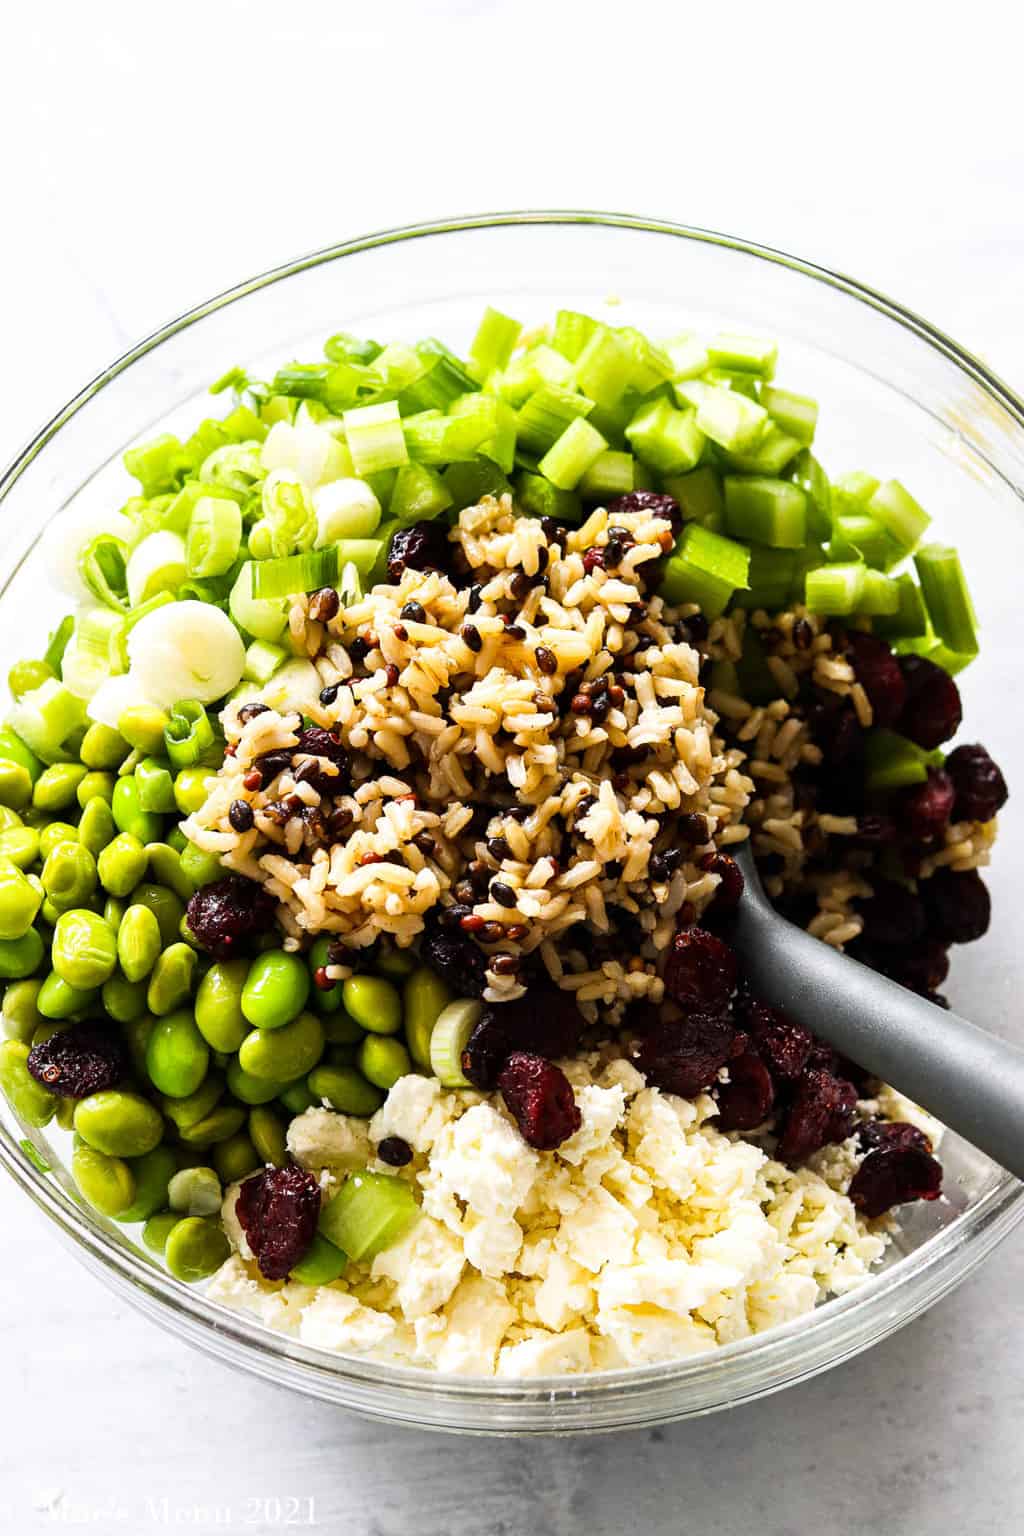 Mixing the cranberry and edamame brown rice salad